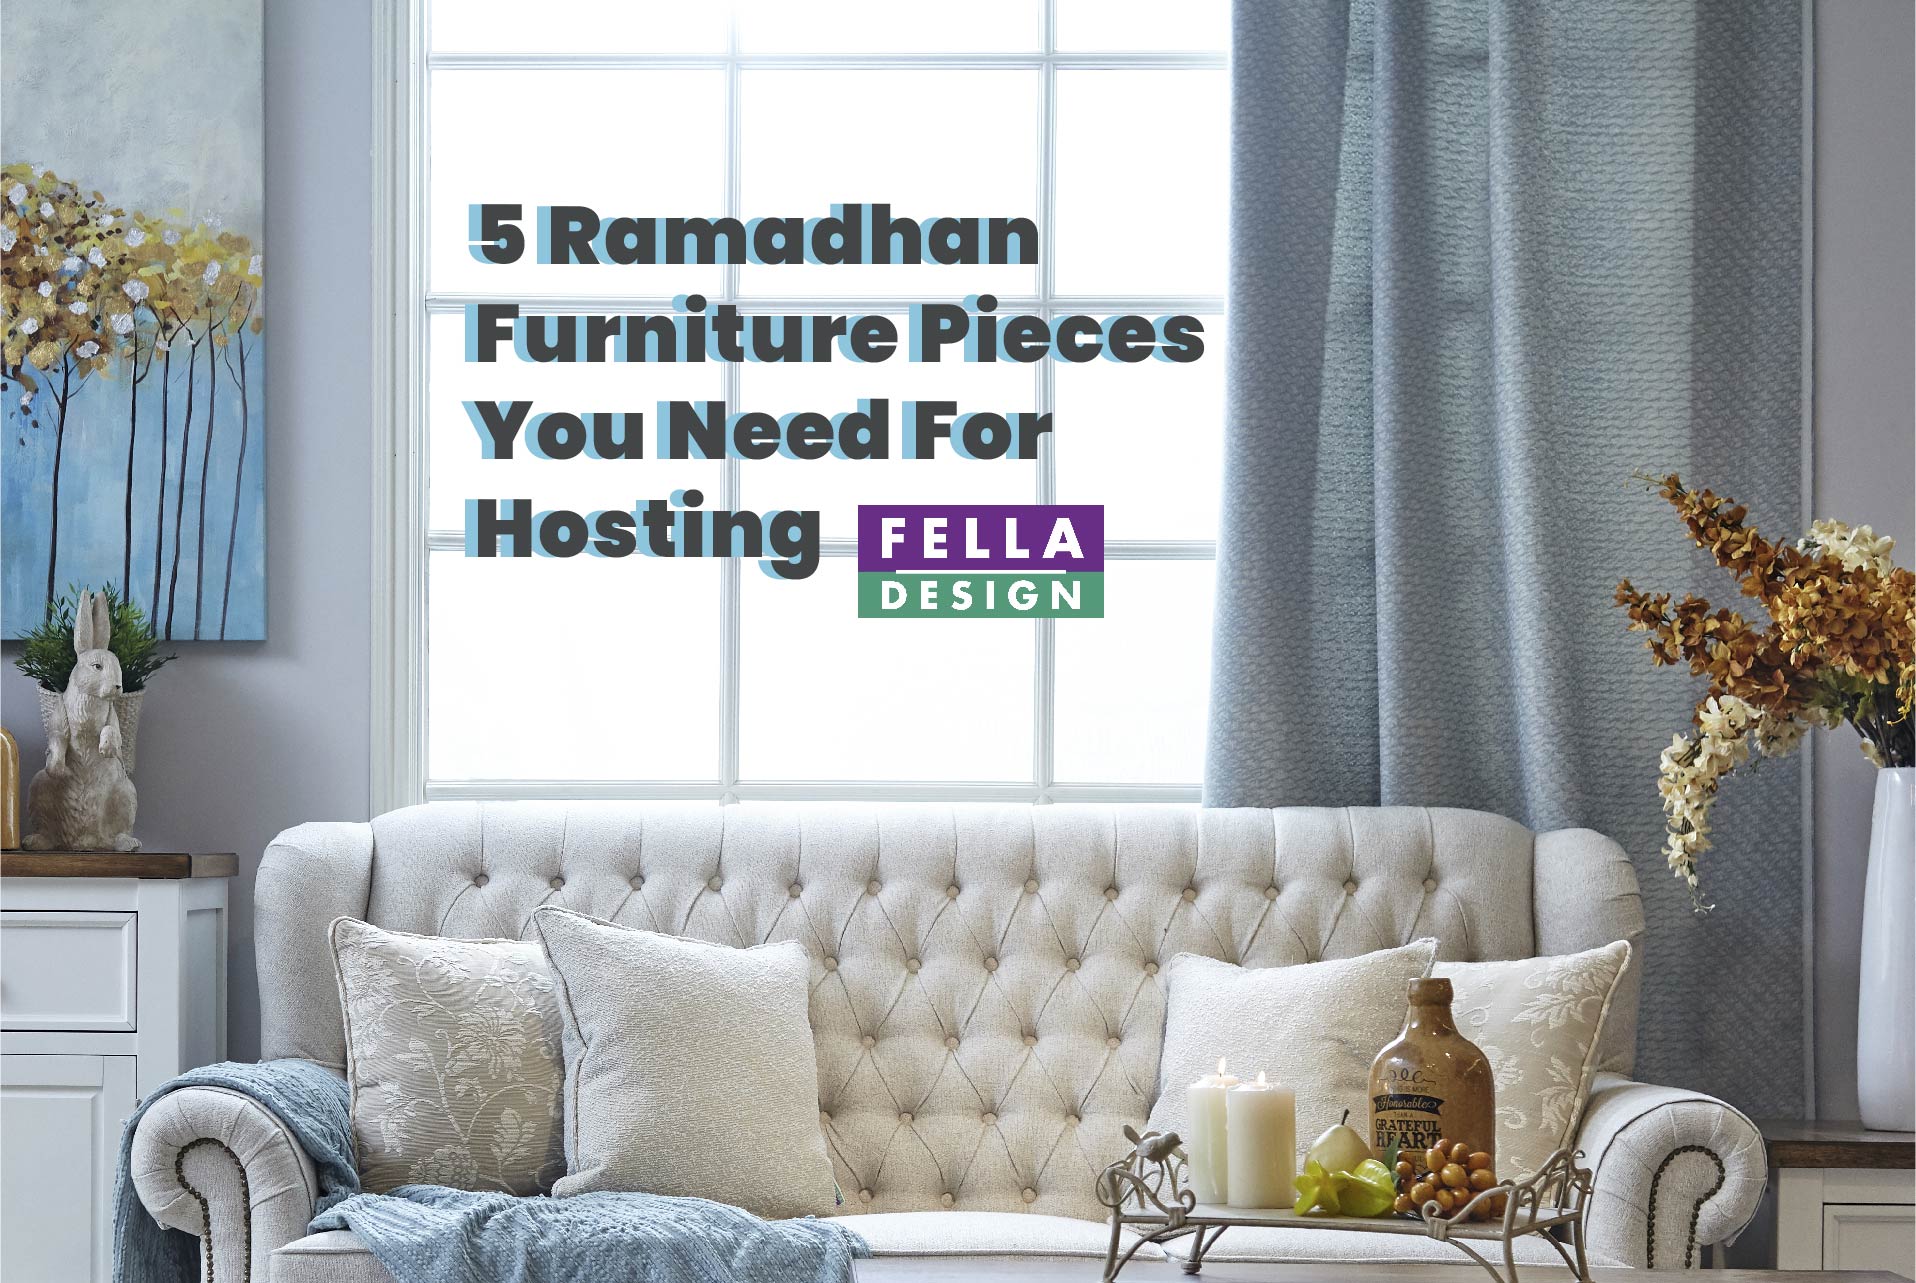 5 Ramadhan Furniture Pieces You Need for Hosting